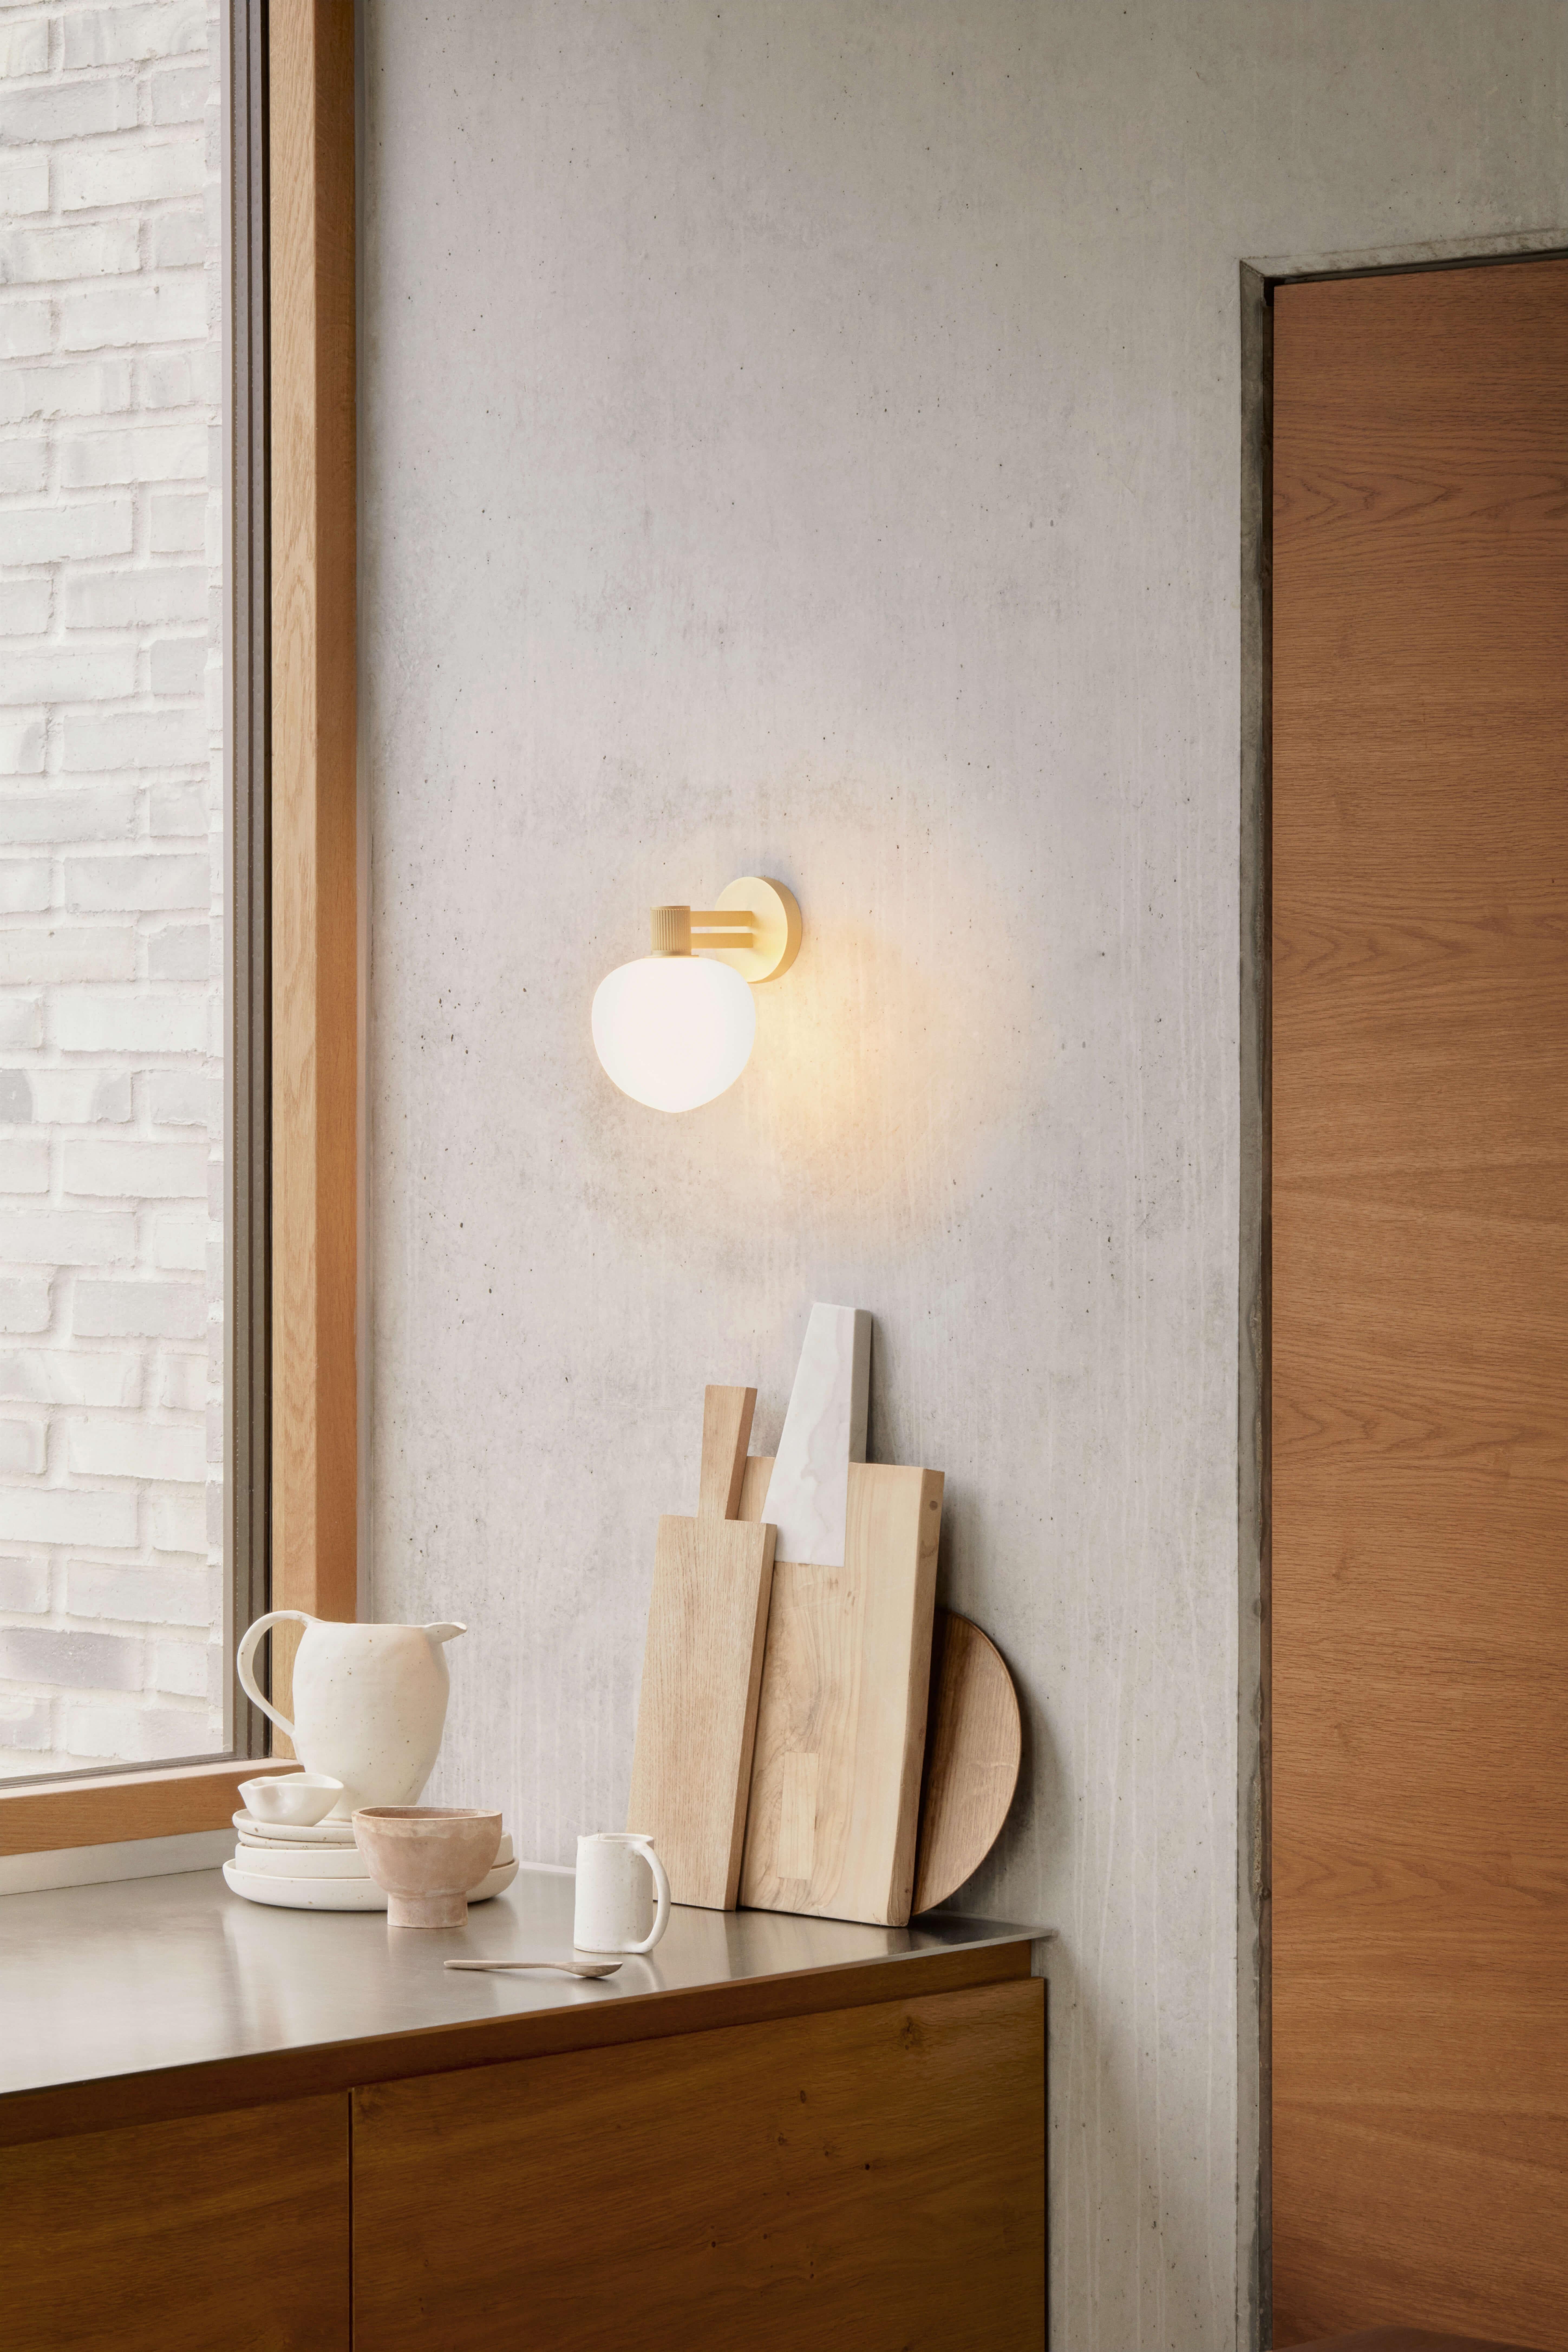 Memoir 120 II Wall Lamp signed by GamFratesi for LYFA.

DIMENSIONS
W 16 x D 12 x H 27.8 cm

COLOURS
Black or brass

Textile wire (white) 600cm
Socket: 2 x G9
Max wattage: 28 Watt
Energy class: The luminaire is compatible with bulbs of energy classes